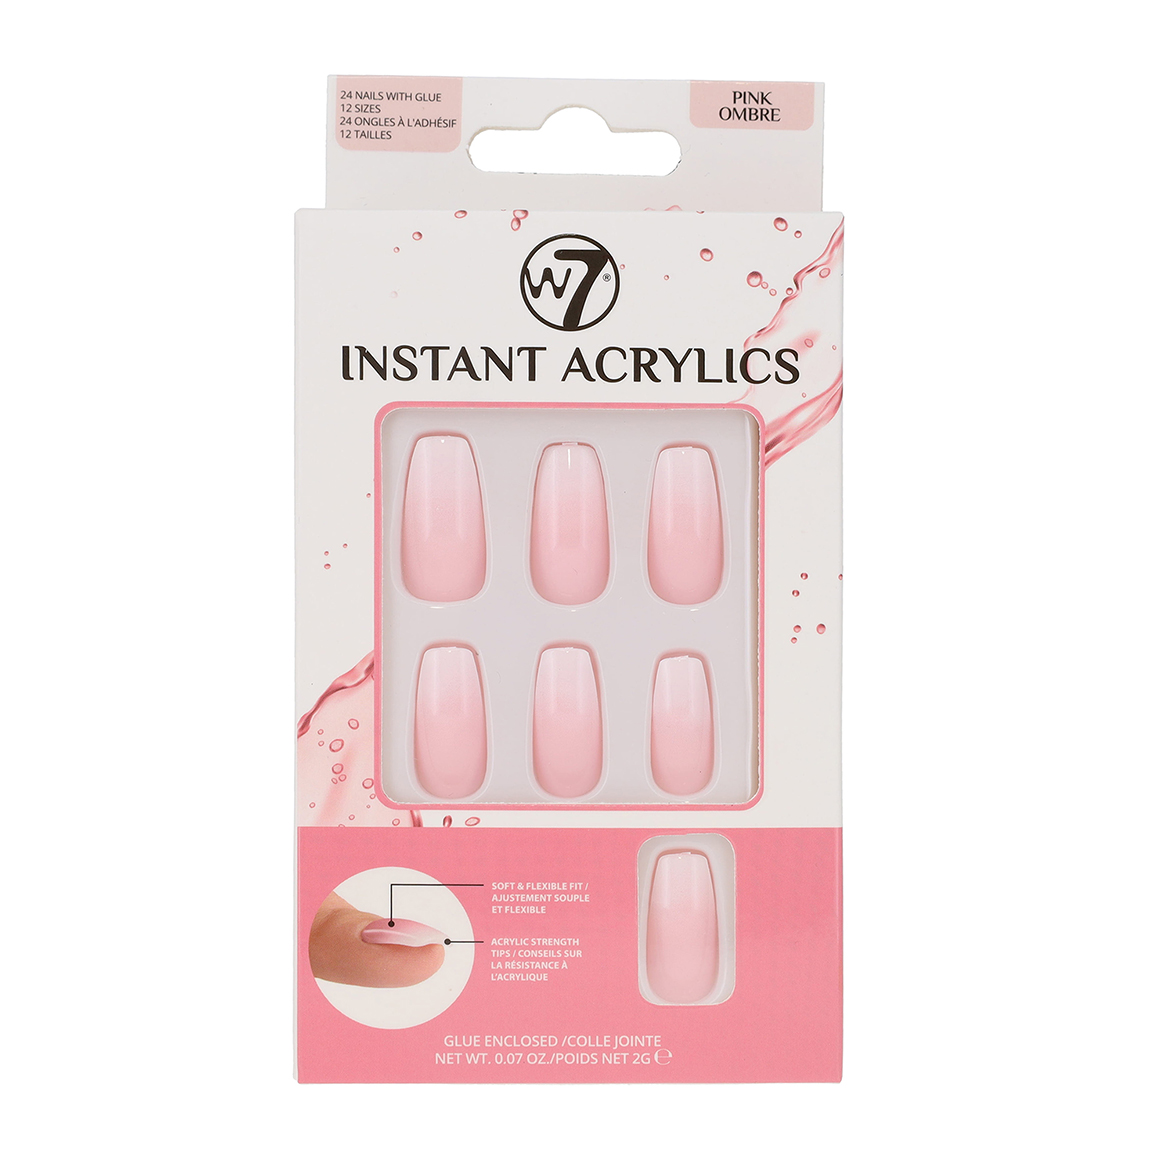 Instant Acrylics - Pink Ombre